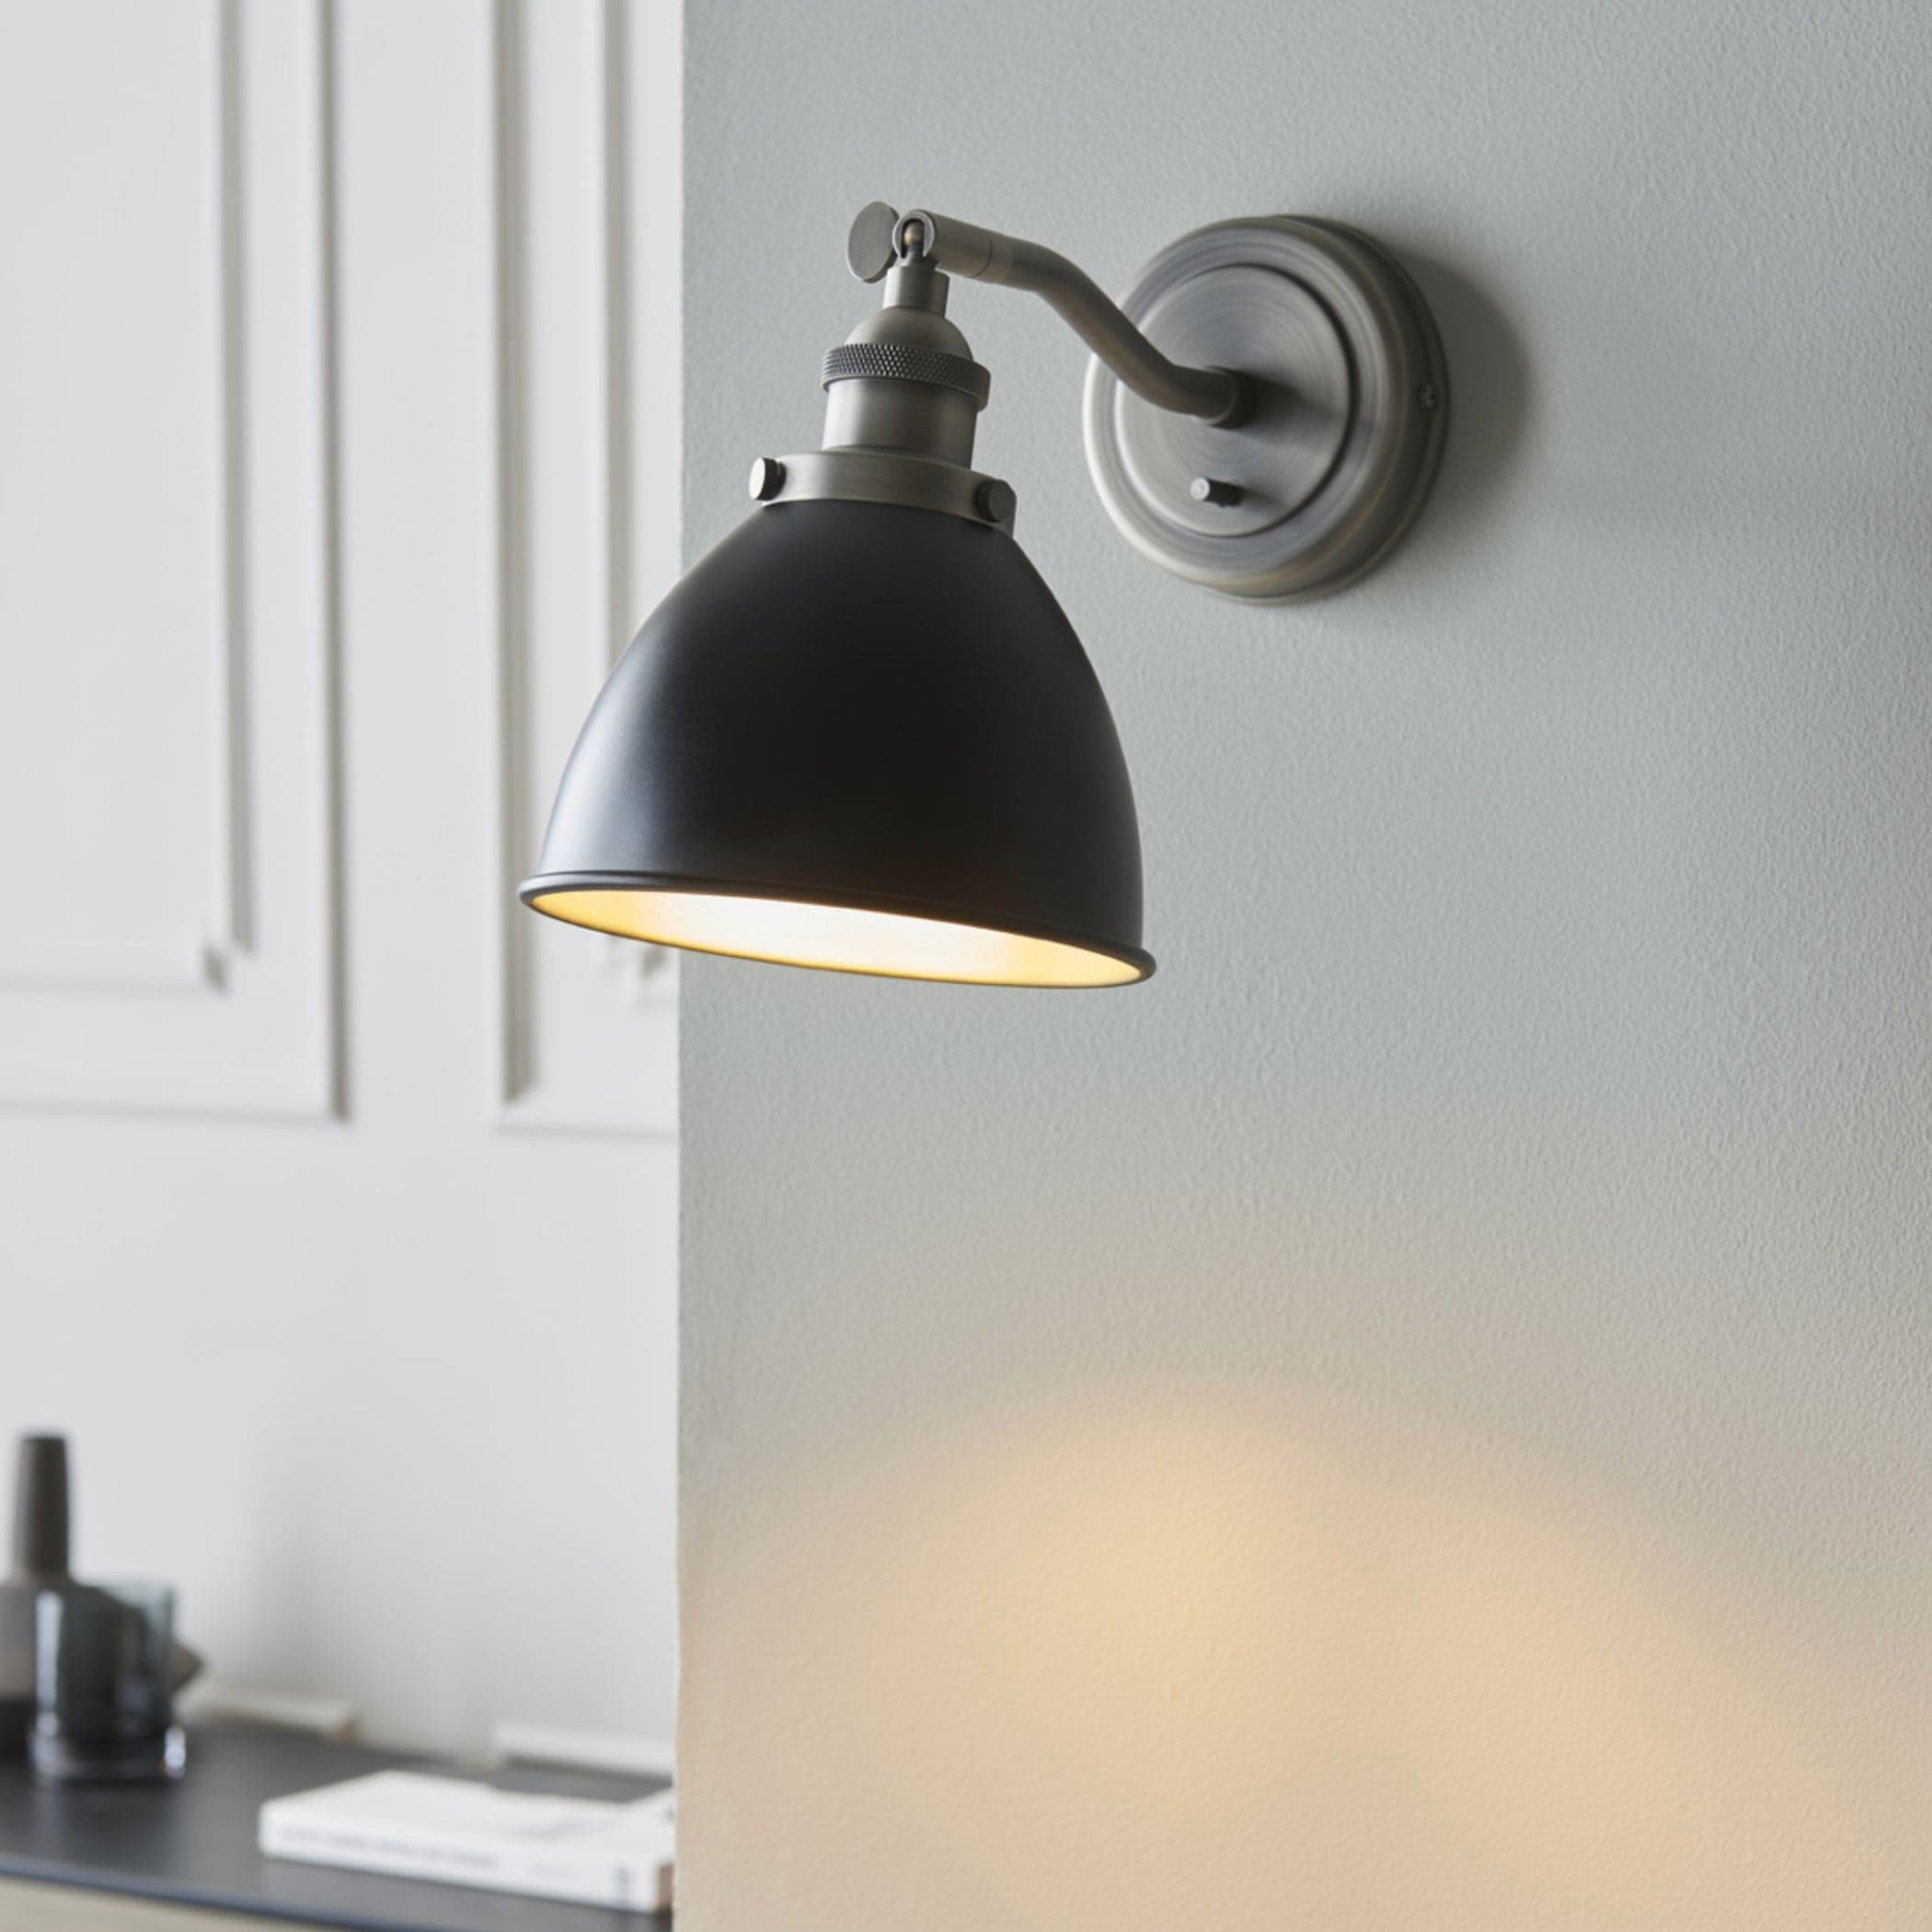 Antiqued Pewter & Black Dome Wall Light